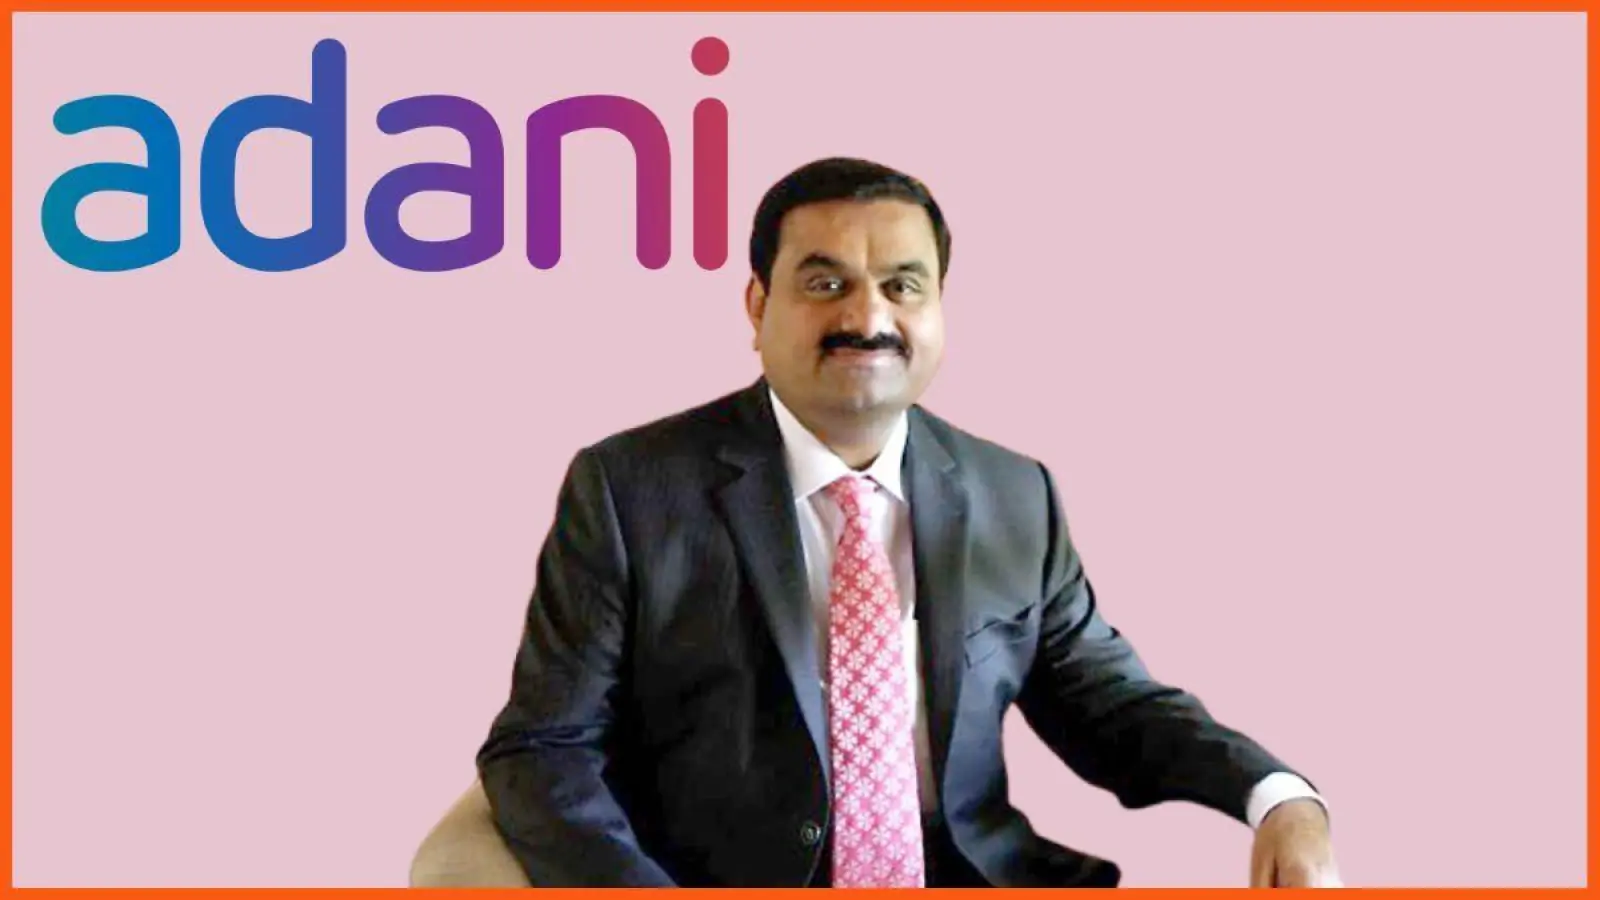 Big update on Adani Group, Gautam Adani's company took many decisions in the board meeting